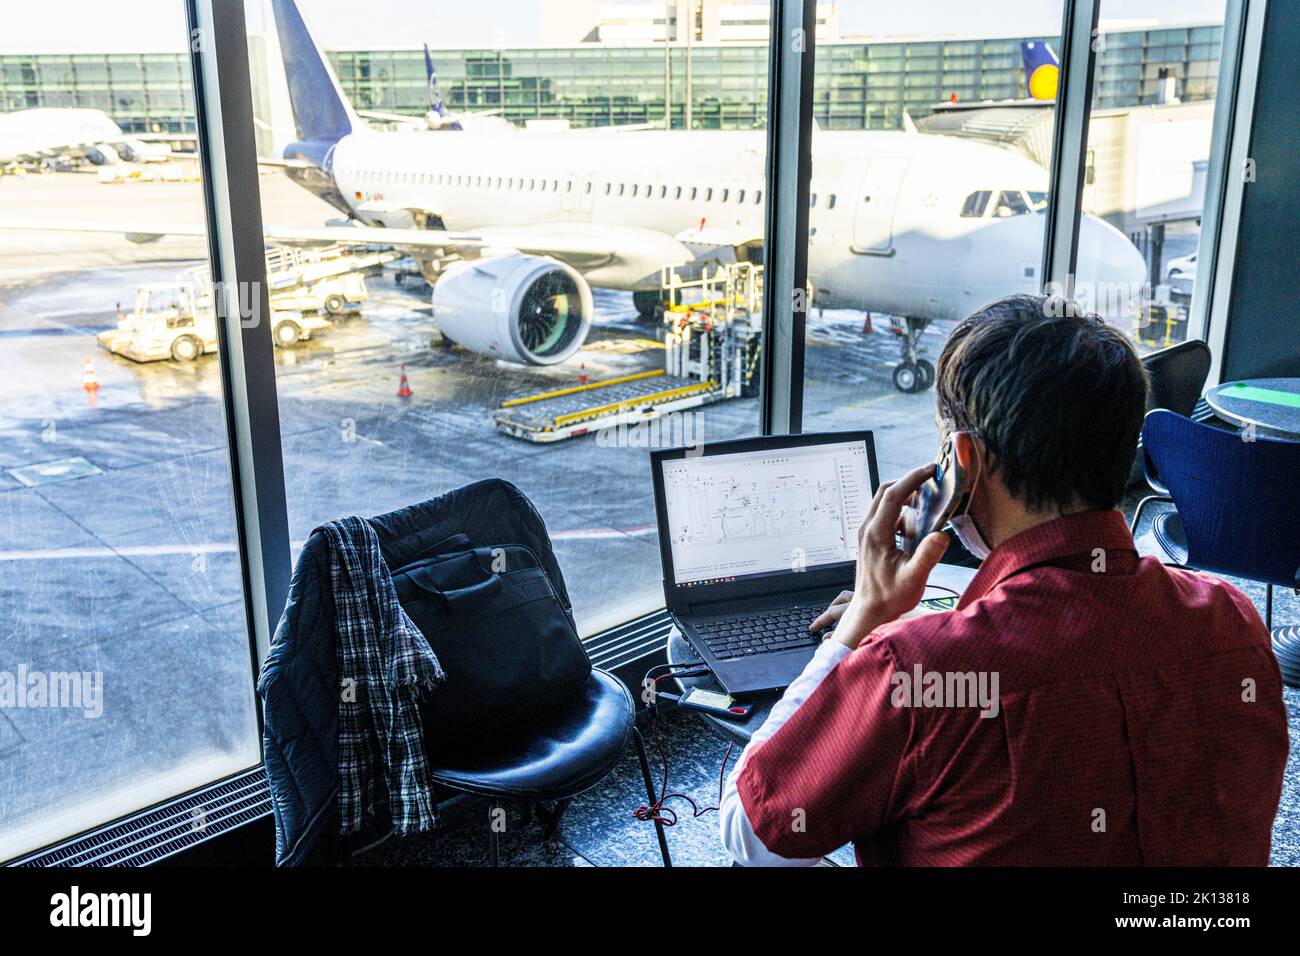 Rear view of mature man using laptop and smartphone while waiting at the airport, Norway, Scandinavia, Europe Stock Photo